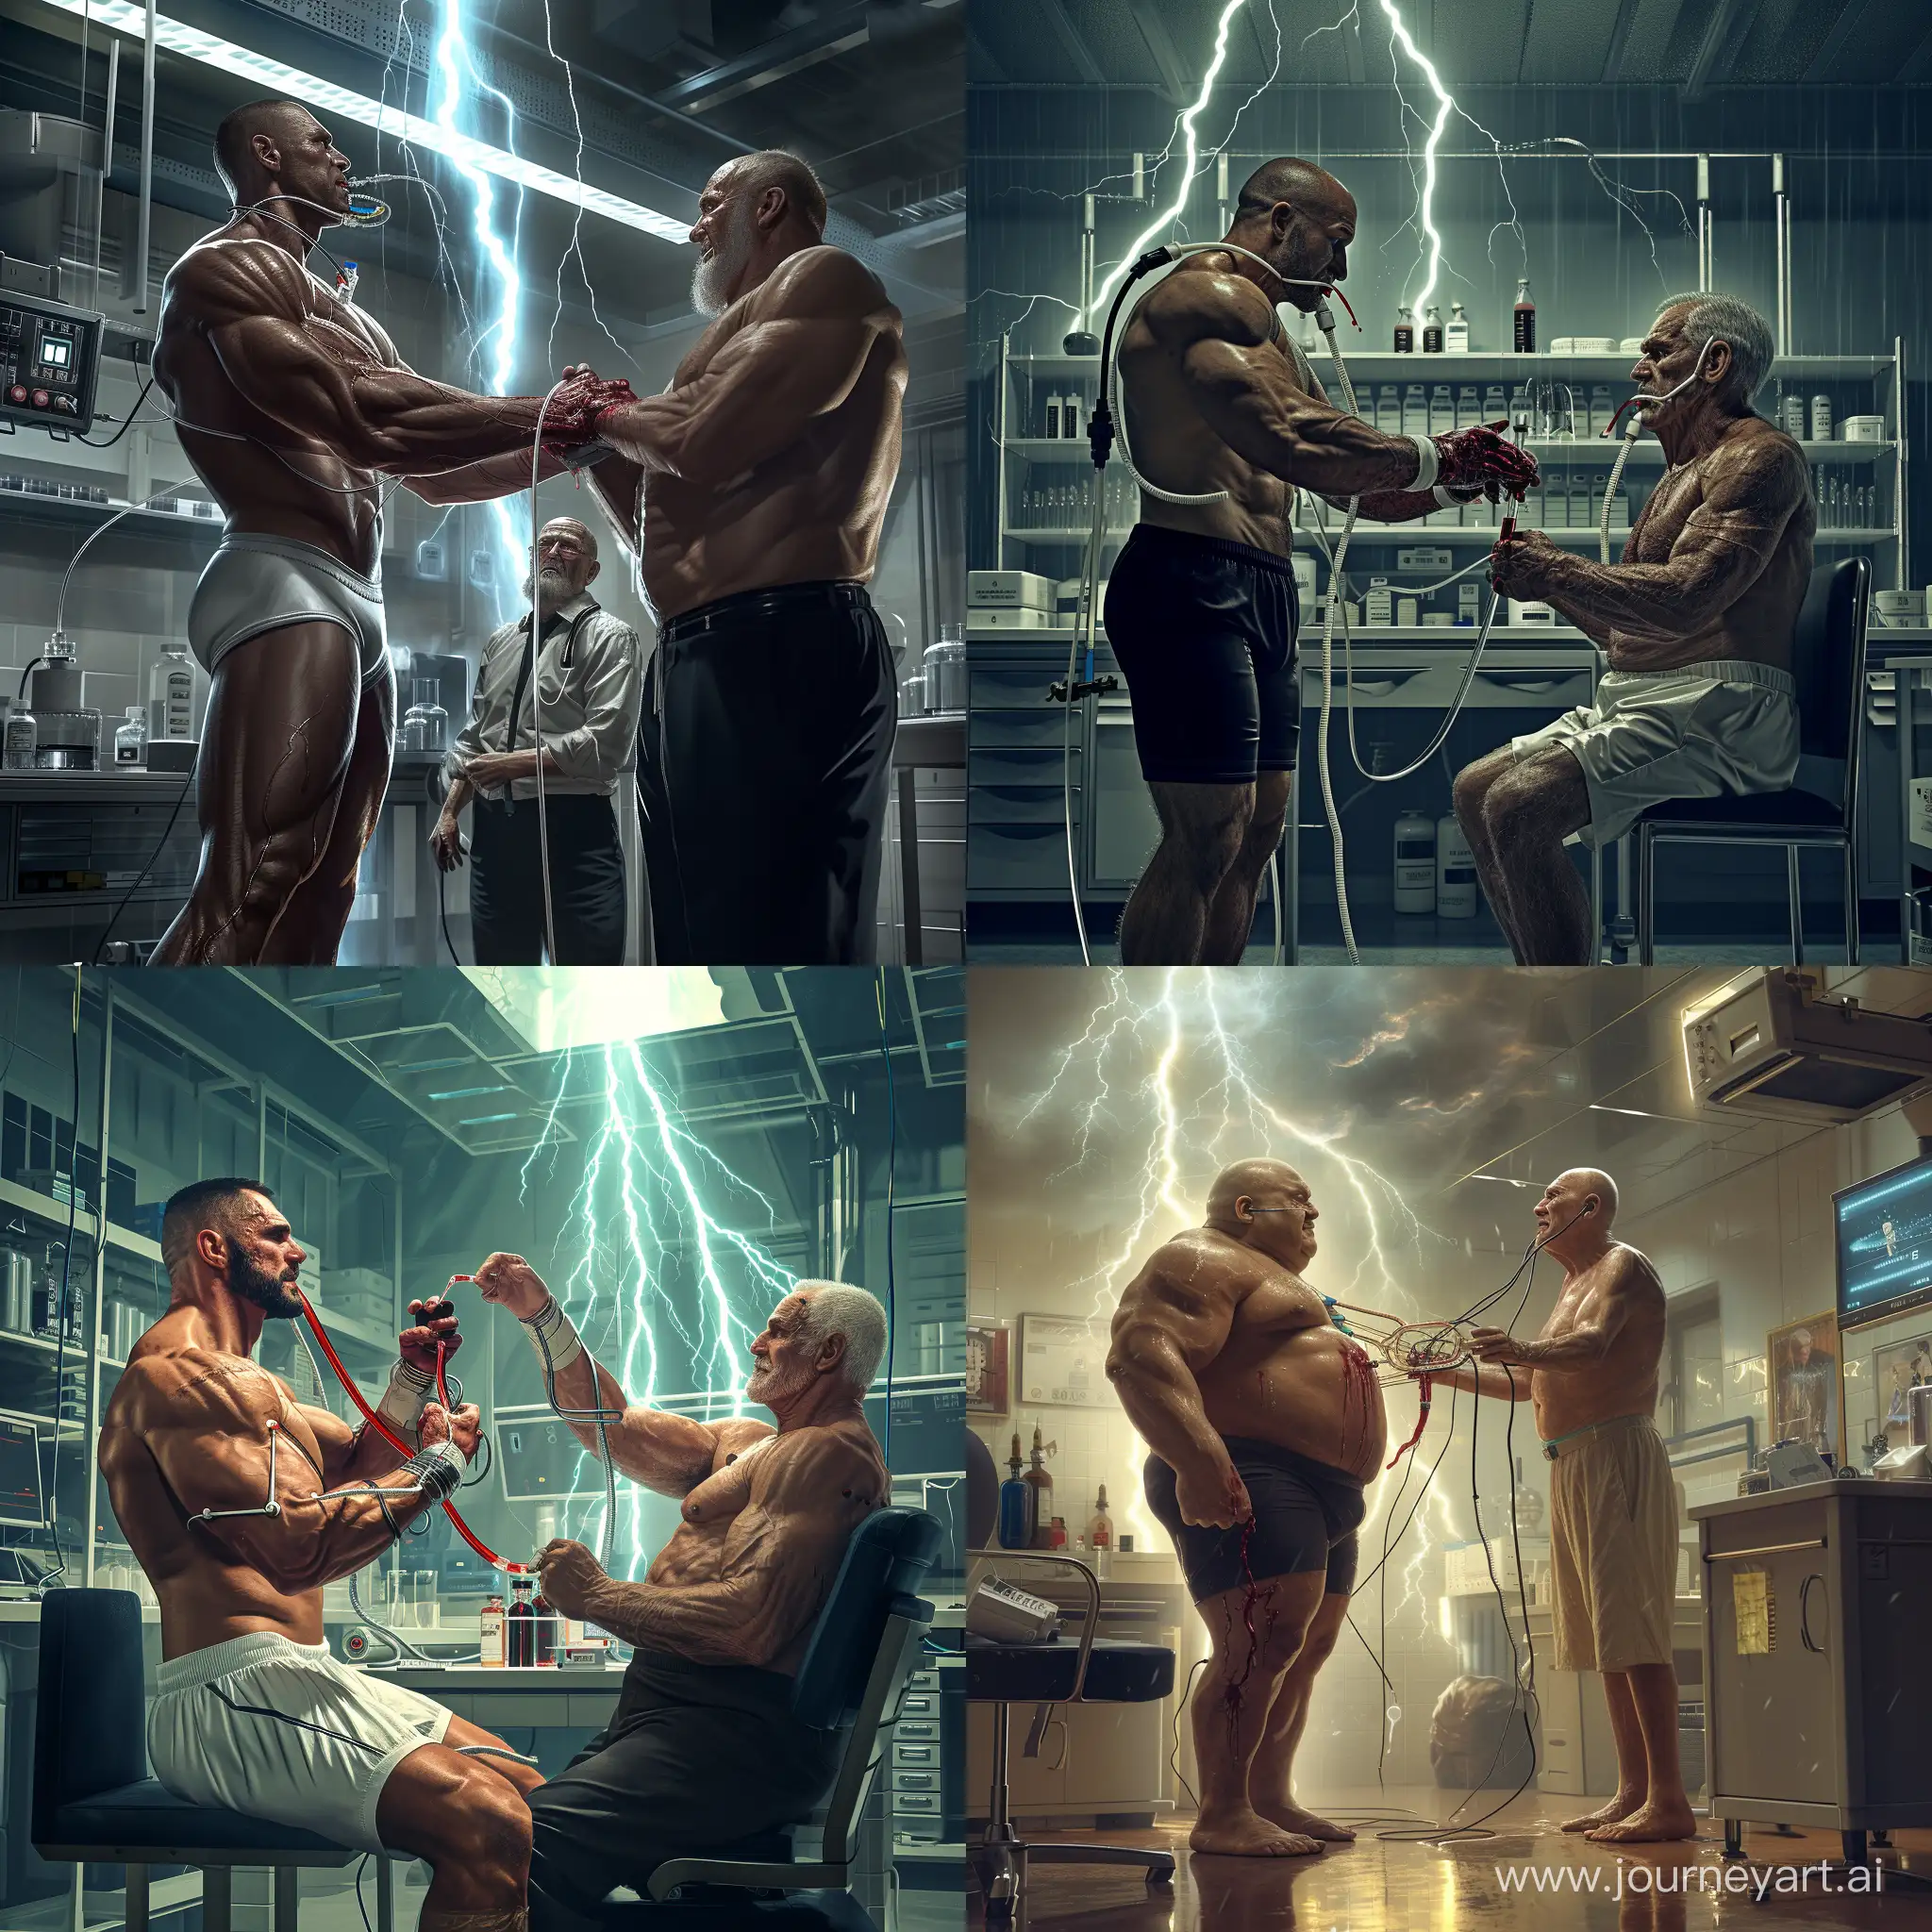 Futuristic-Blood-Transfusion-Athletic-Connection-in-Photorealistic-Lab